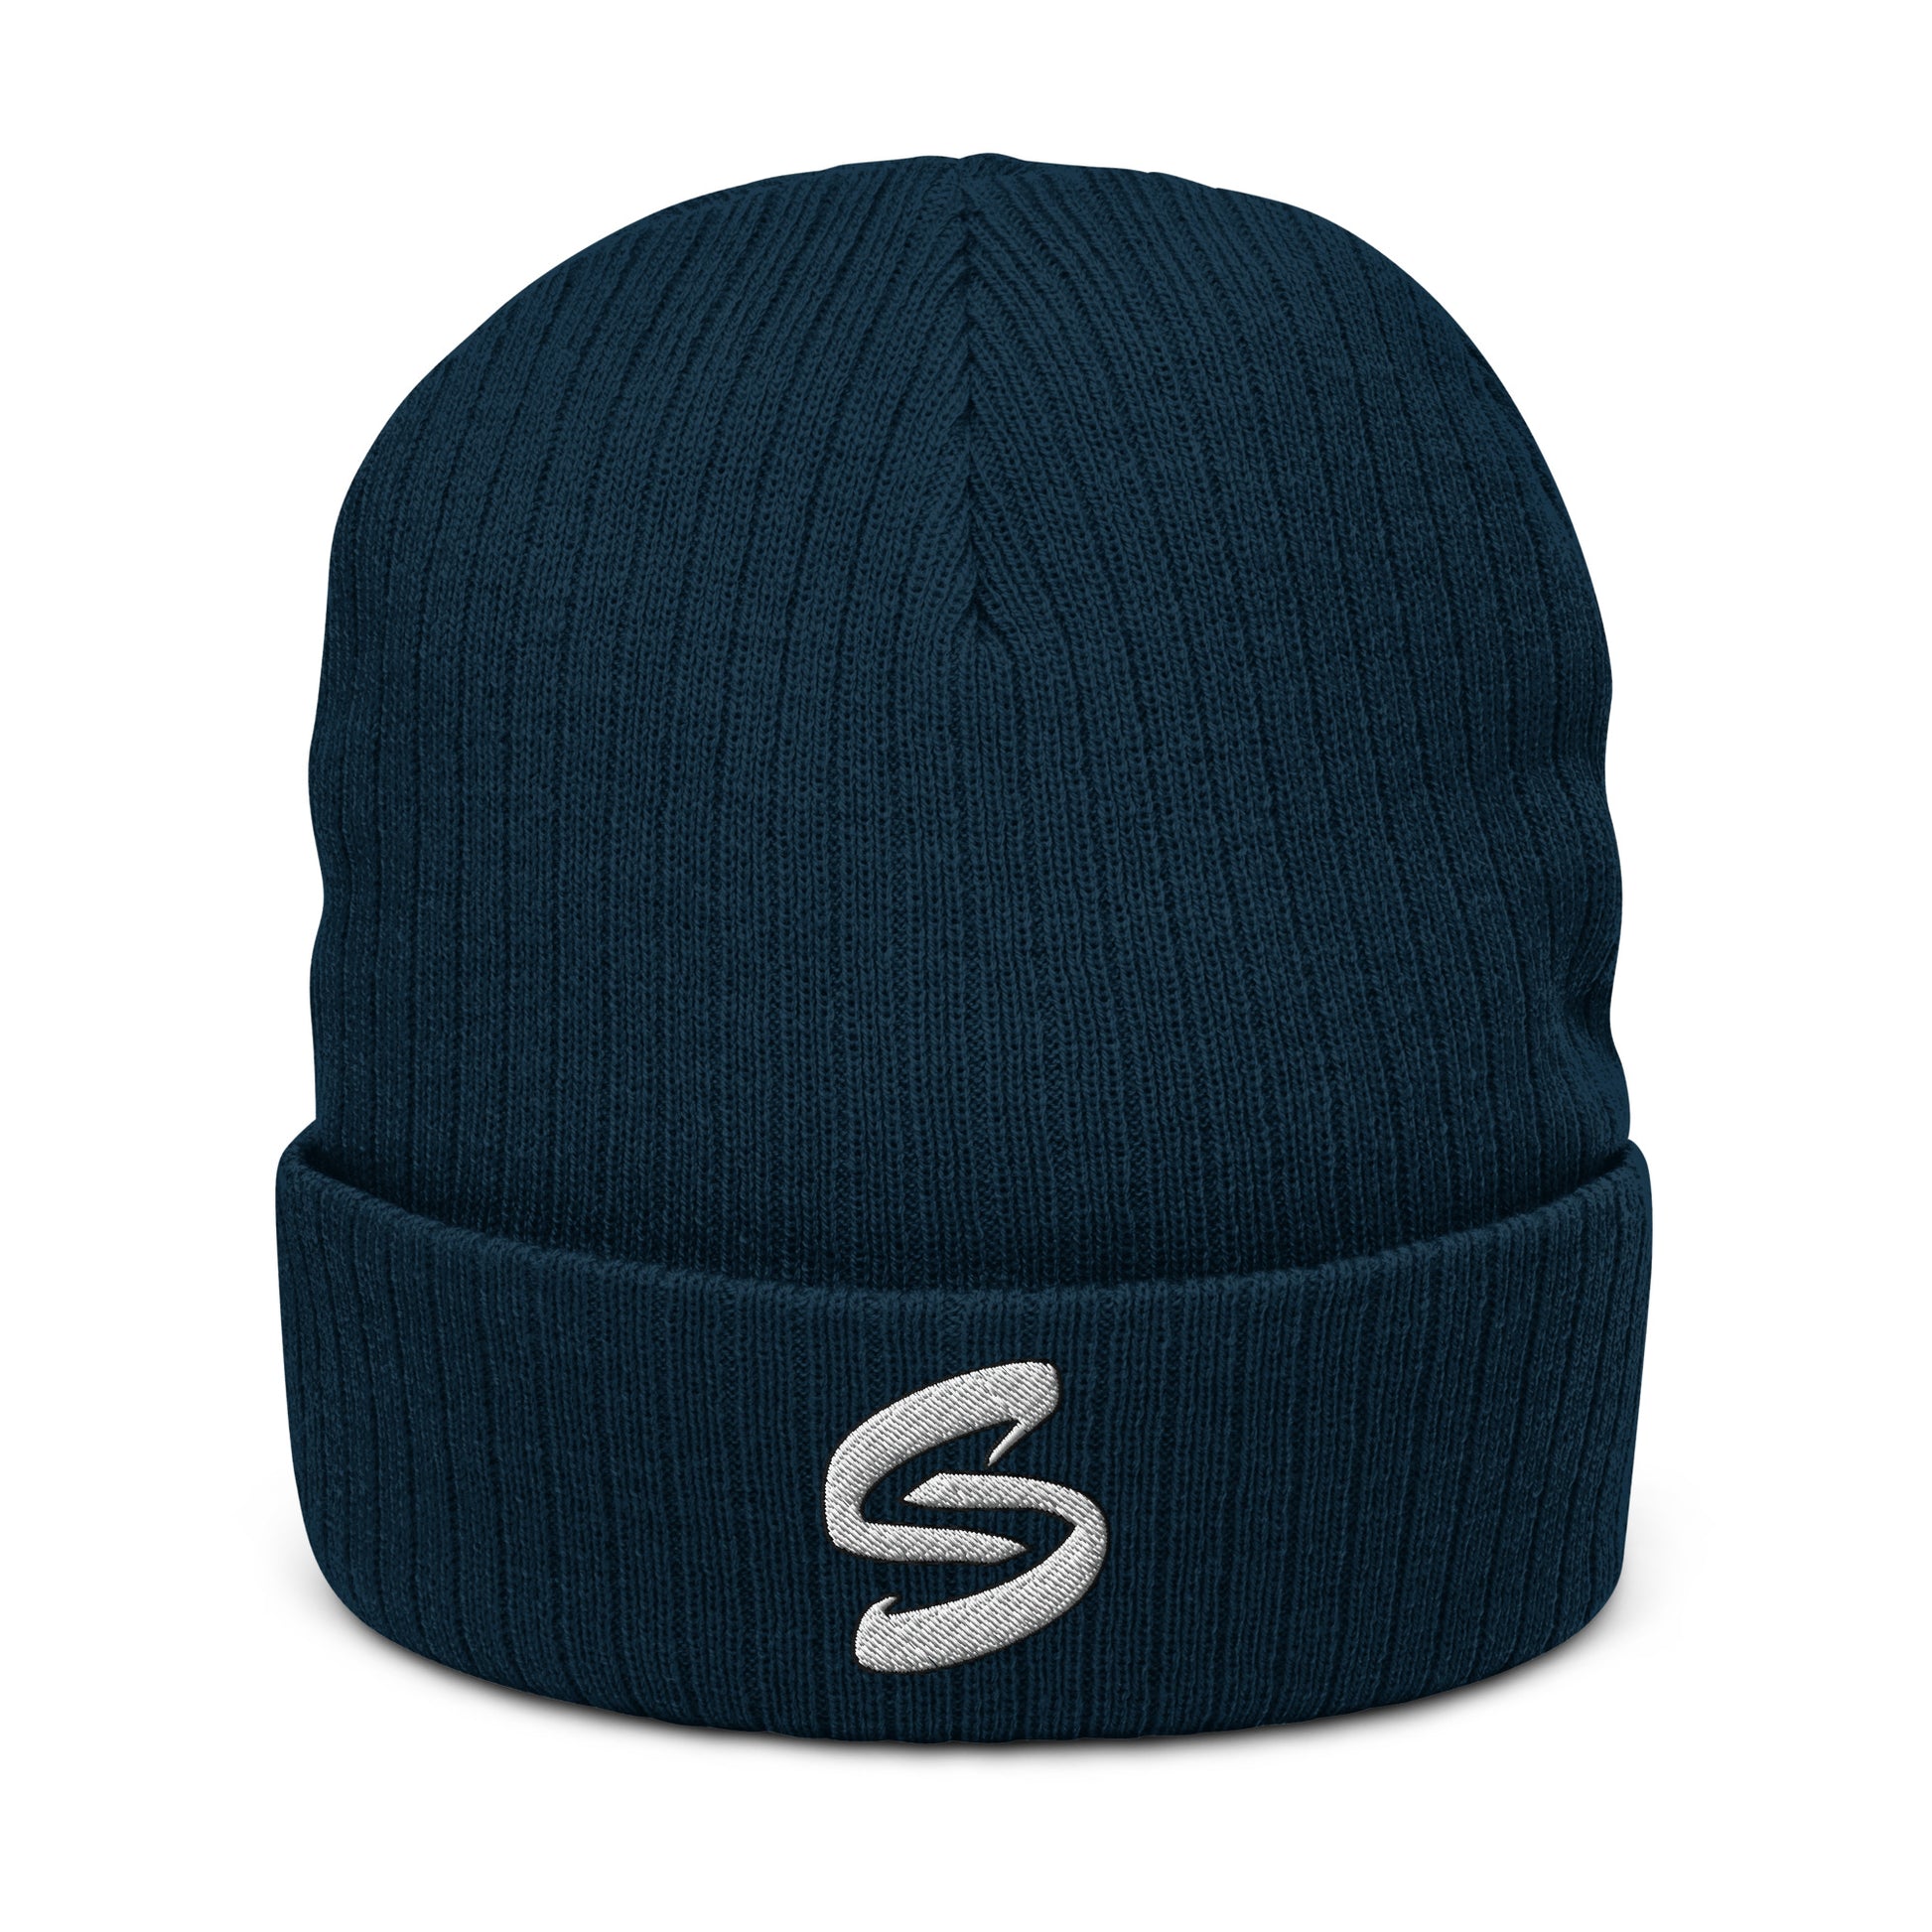 Ribbed knit beanie in recycled polyester and acrylic blend, double-layered with a cuffed design. Stylish, warm, and versatile accessory for all head sizes. Handcrafted on demand to reduce overproduction and promote sustainable choices. 8.27 inches (21 cm) in length. Beanie in Navy Blue with embroidered White Send Coalition S logo